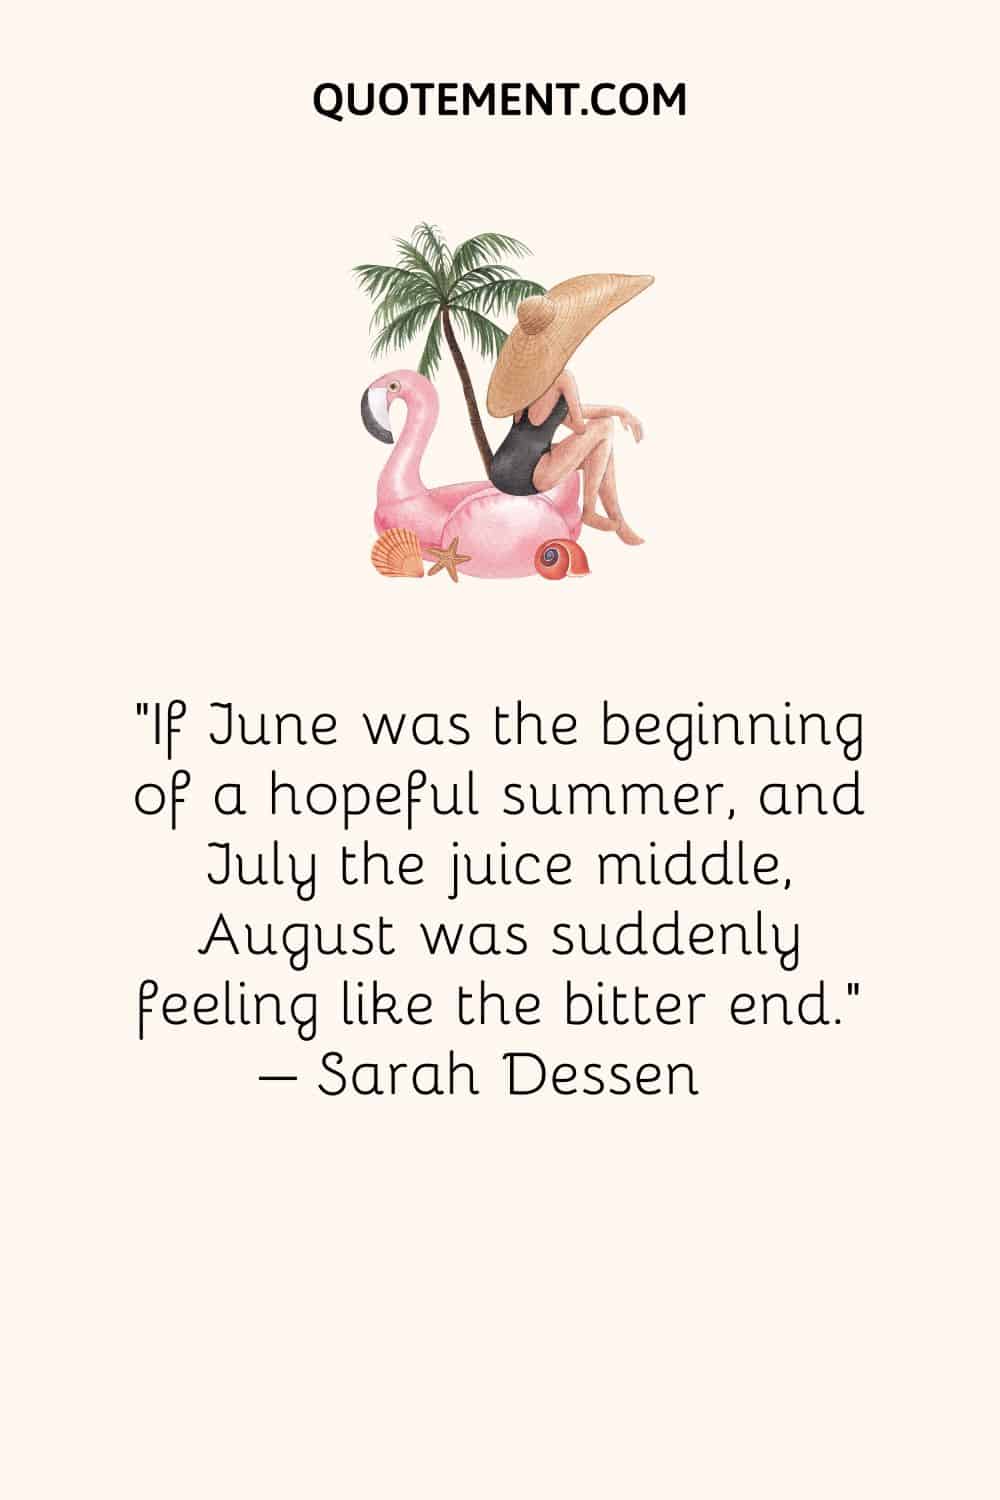 If June was the beginning of a hopeful summer, and July the juice middle, August was suddenly feeling like the bitter end. – Sarah Dessen